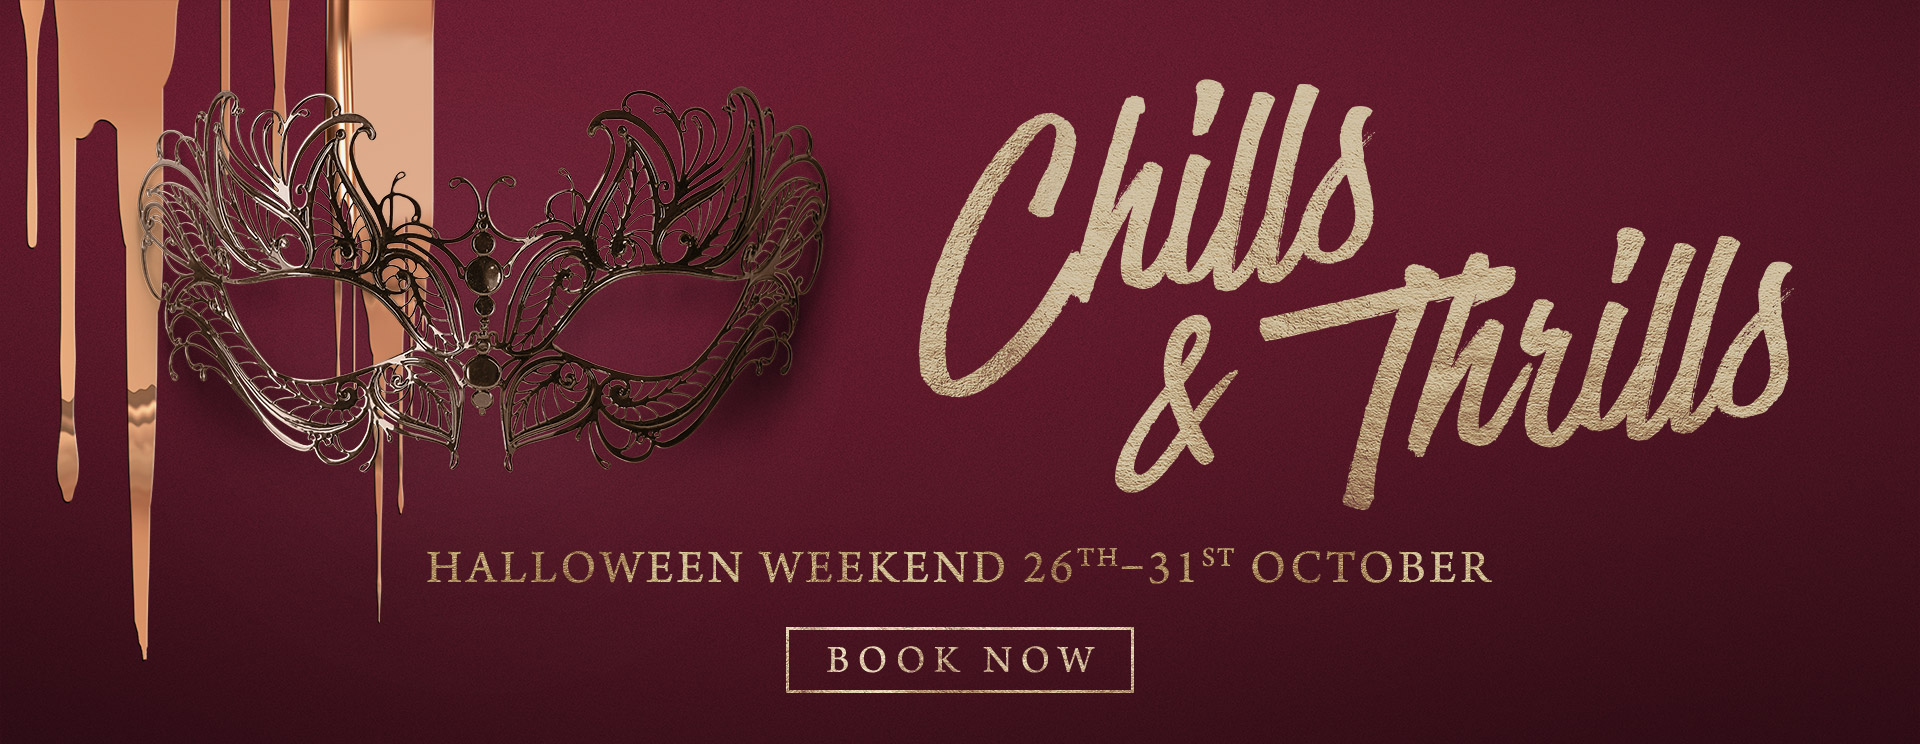 Chills & Thrills this Halloween at The Kingfisher